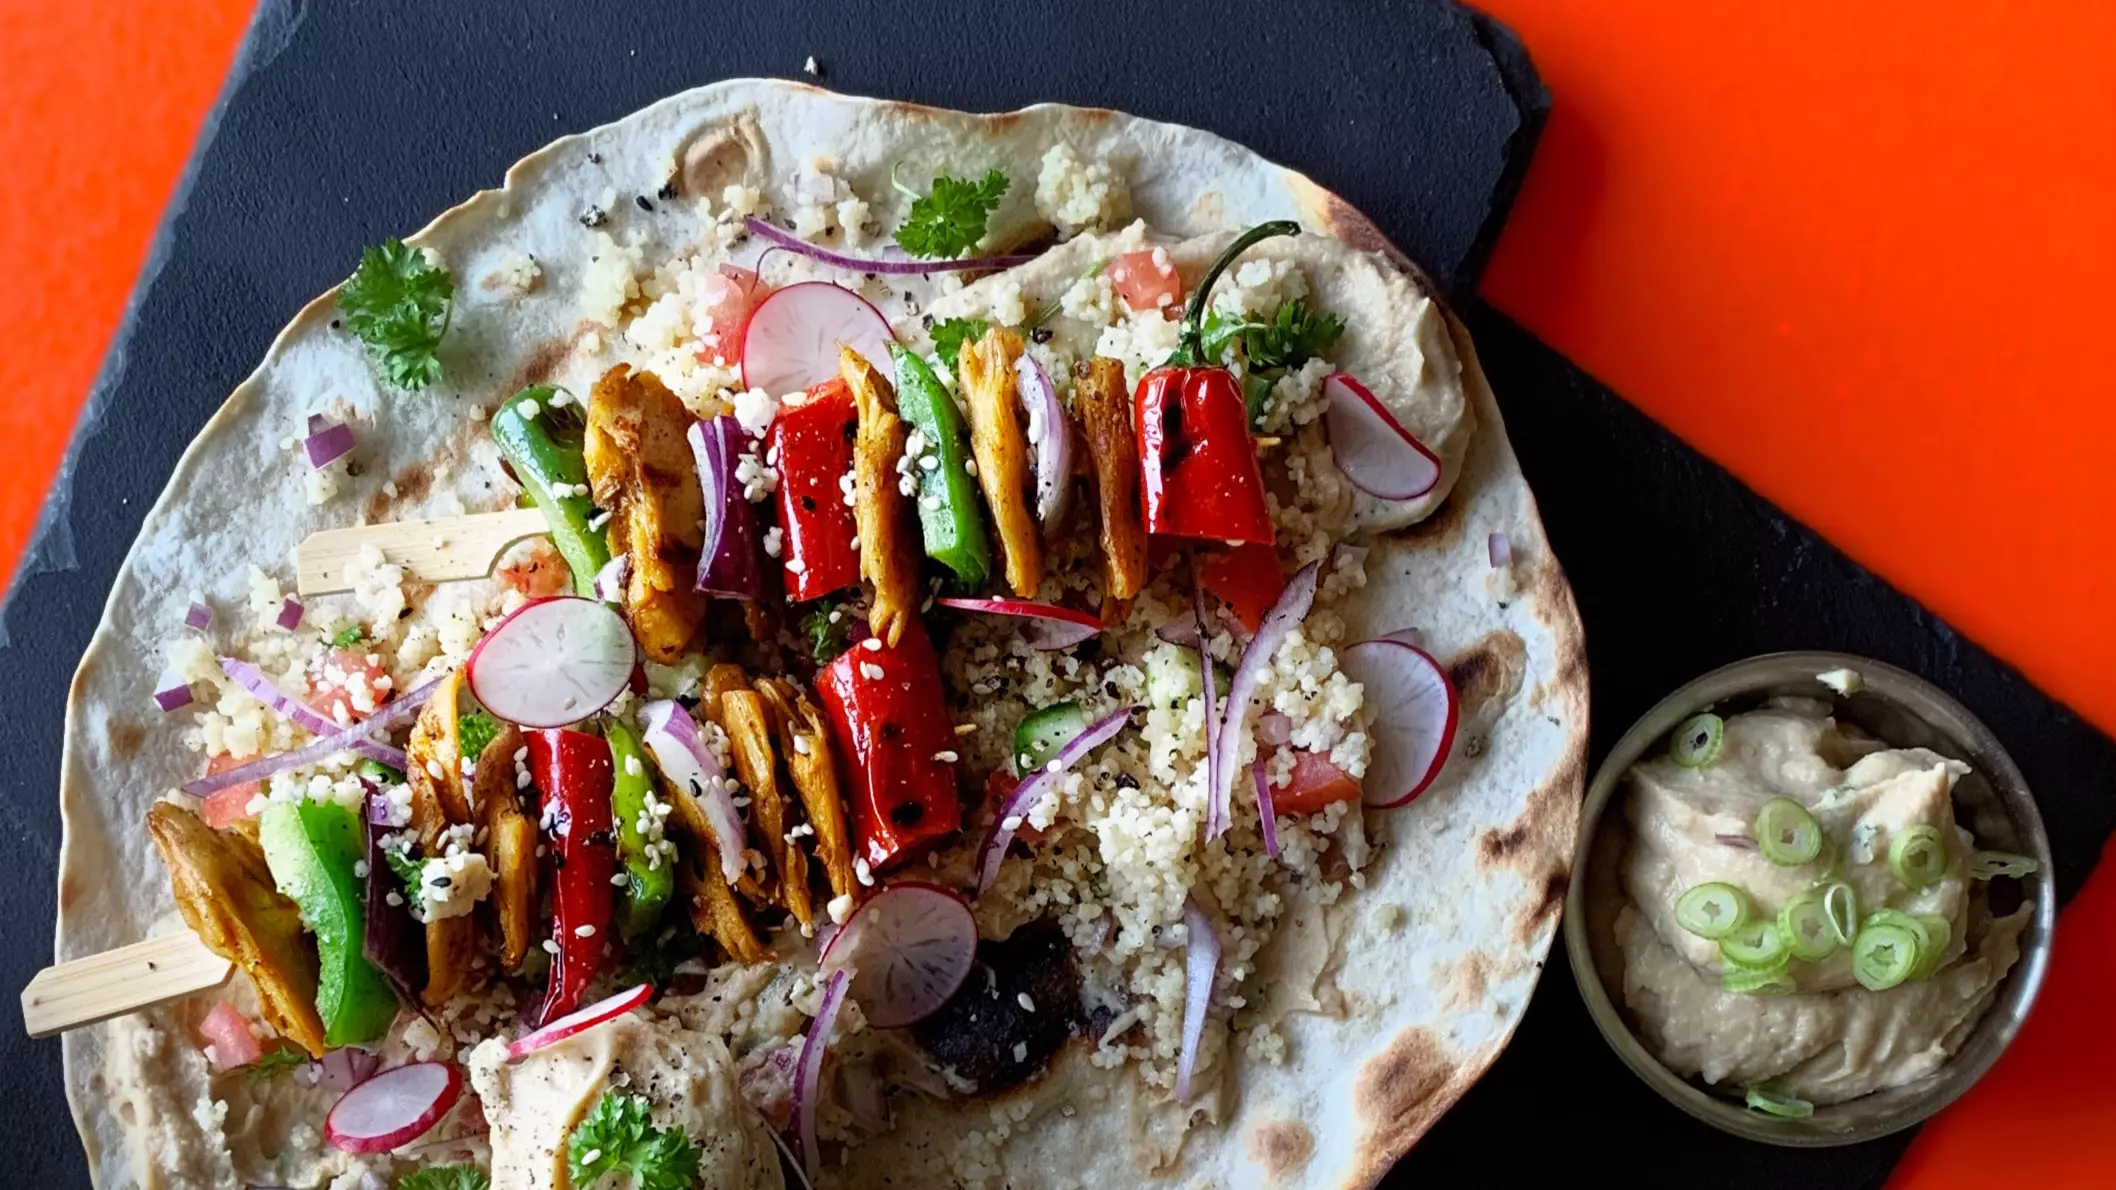 Tourists In Turkey Being Charged £43 For A Kebab As Prices Are Hiked